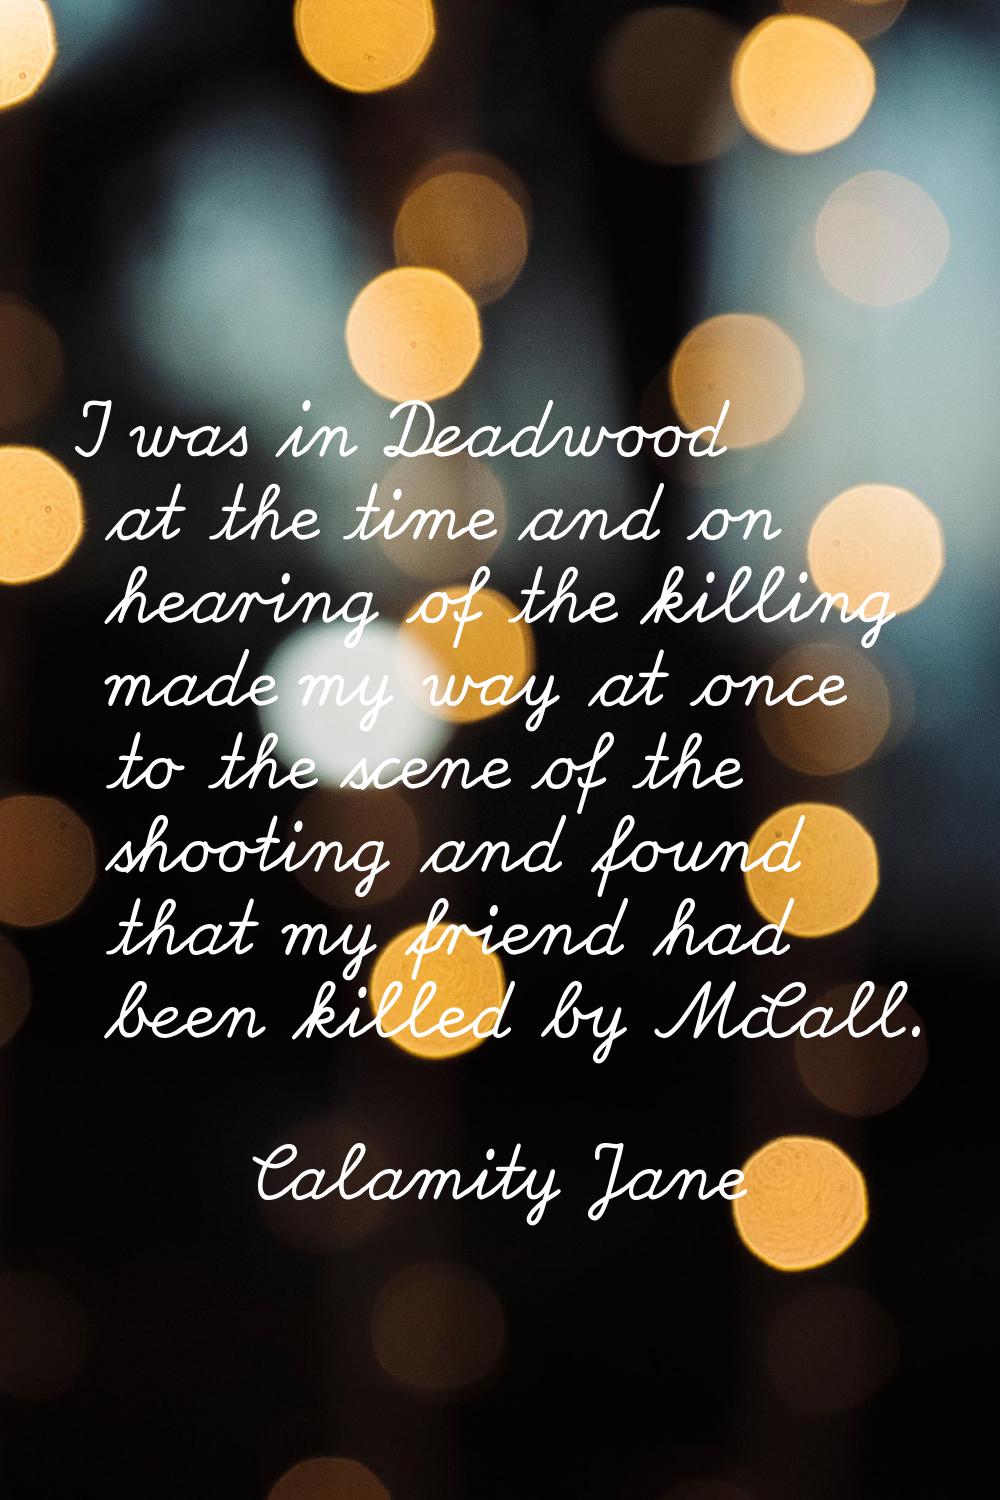 I was in Deadwood at the time and on hearing of the killing made my way at once to the scene of the